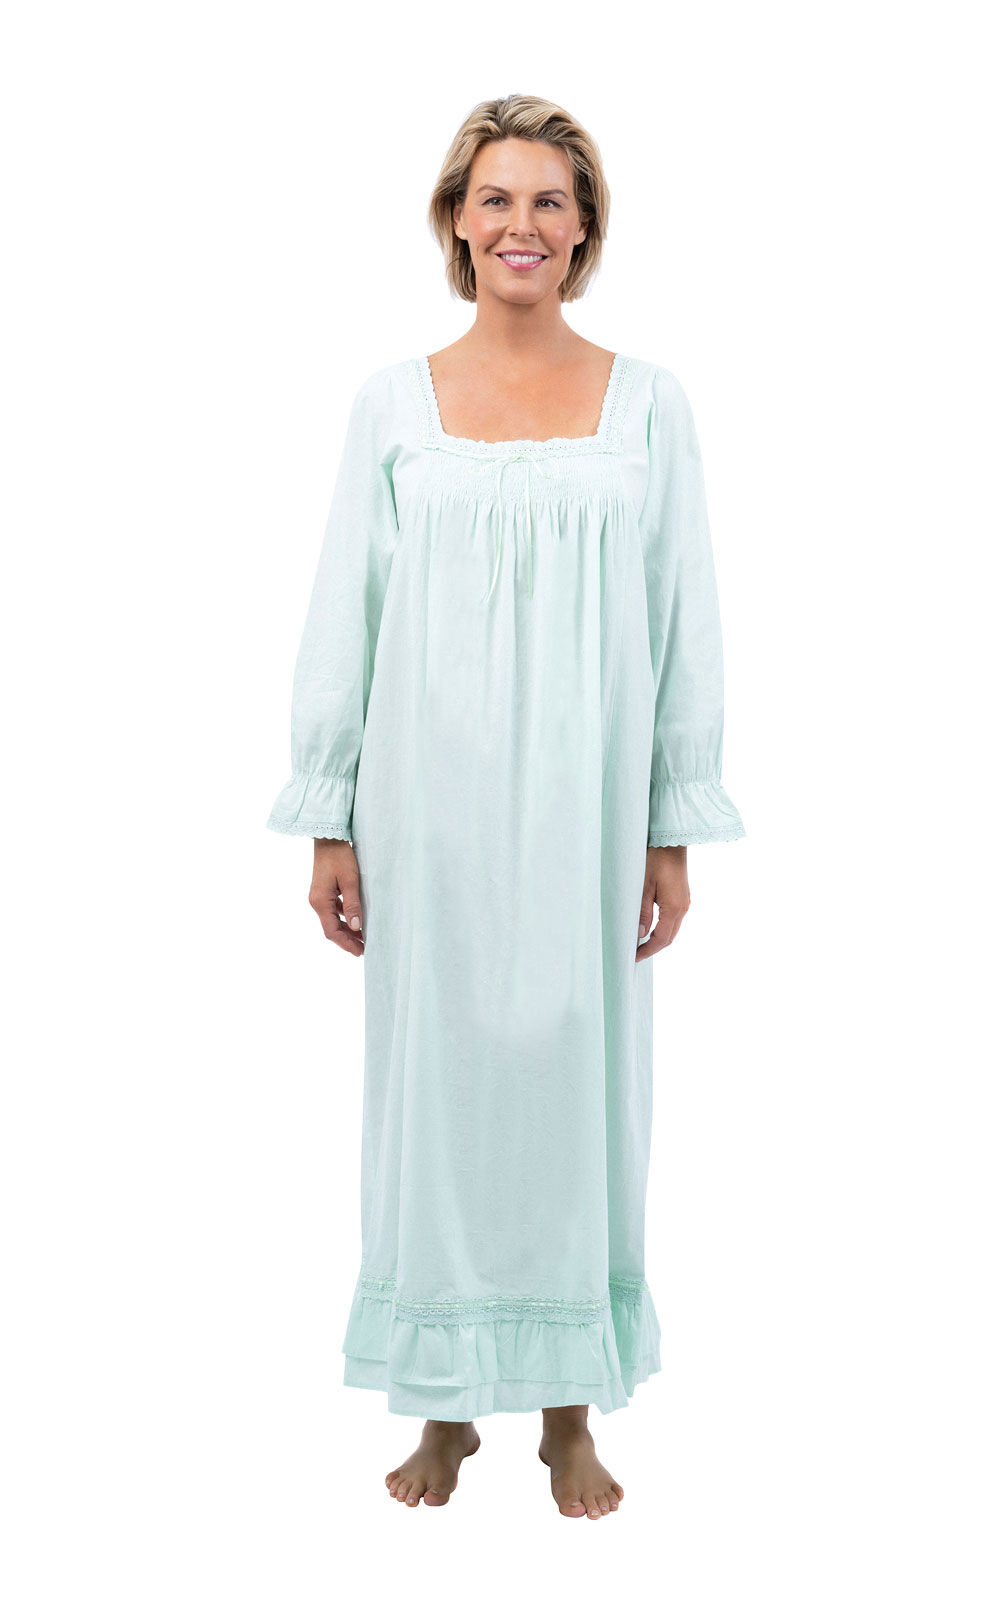 The 1 for U Violet LARGE White Women's Victorian Cotton Designer Nightgown 